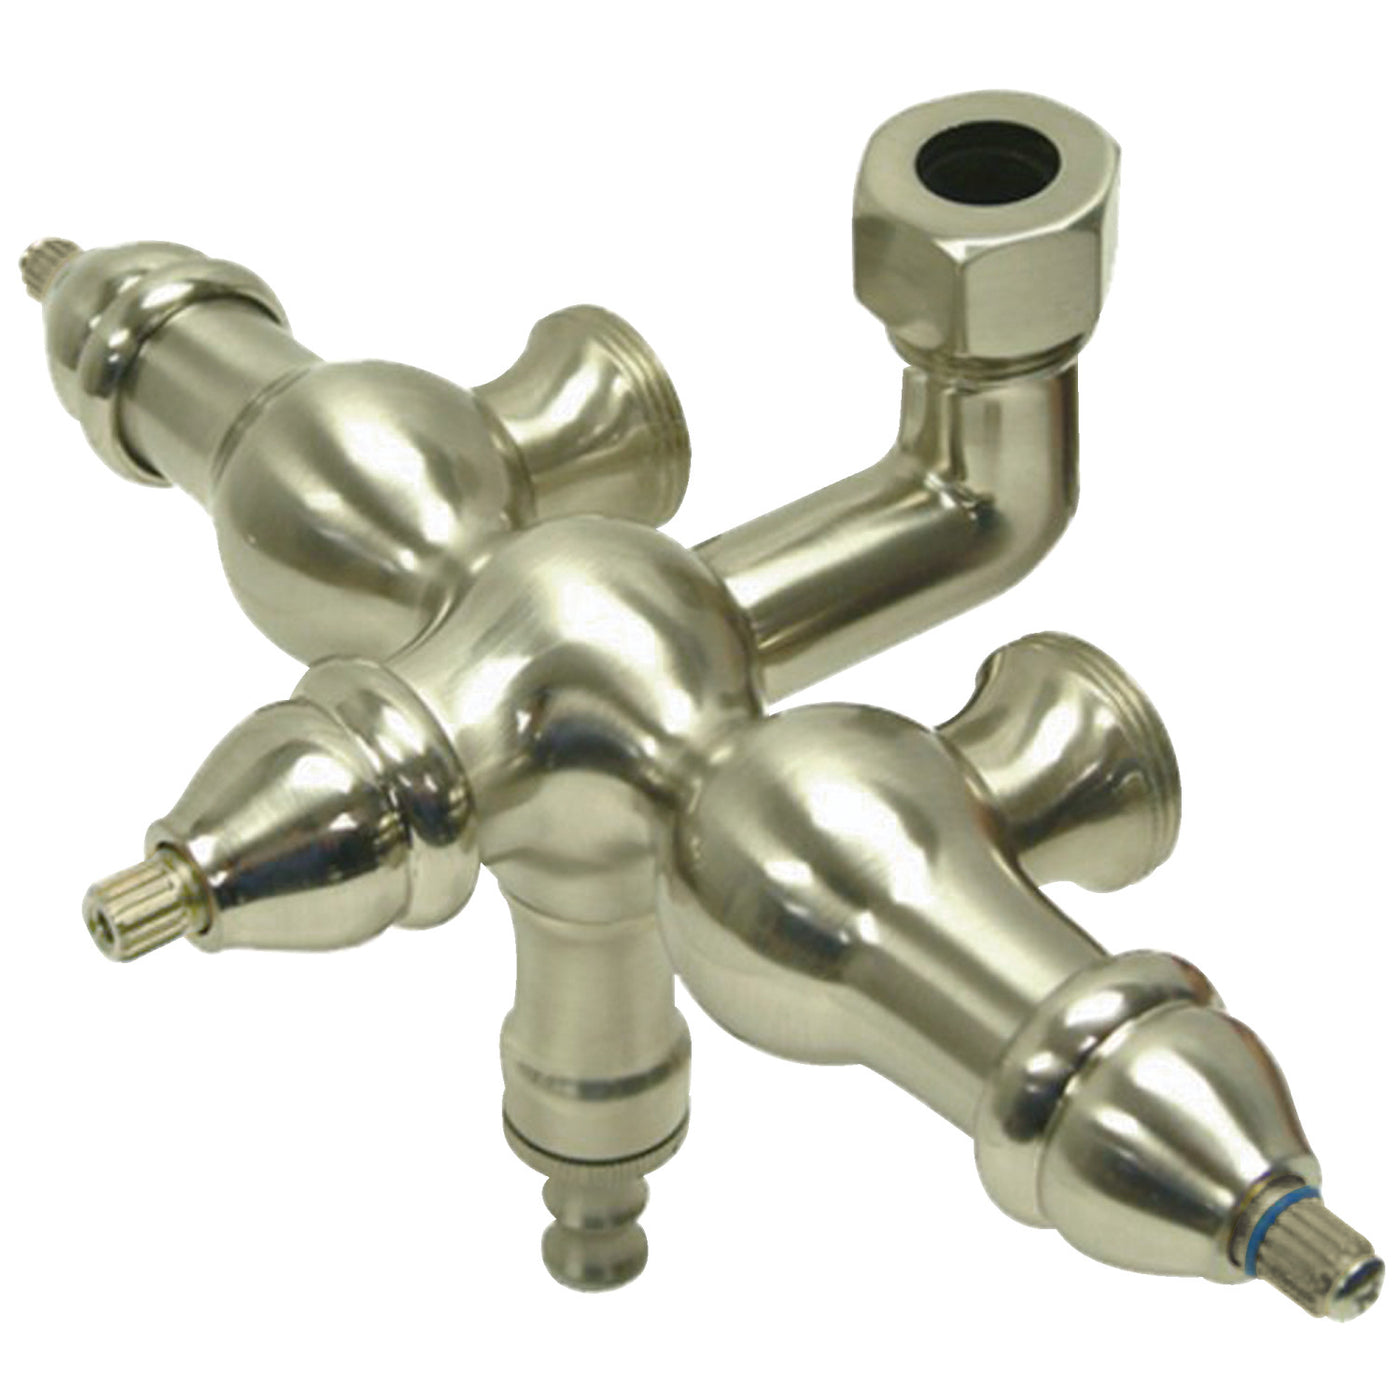 Elements of Design ED400-8 Down Spout Tub Faucet Body, Brushed Nickel